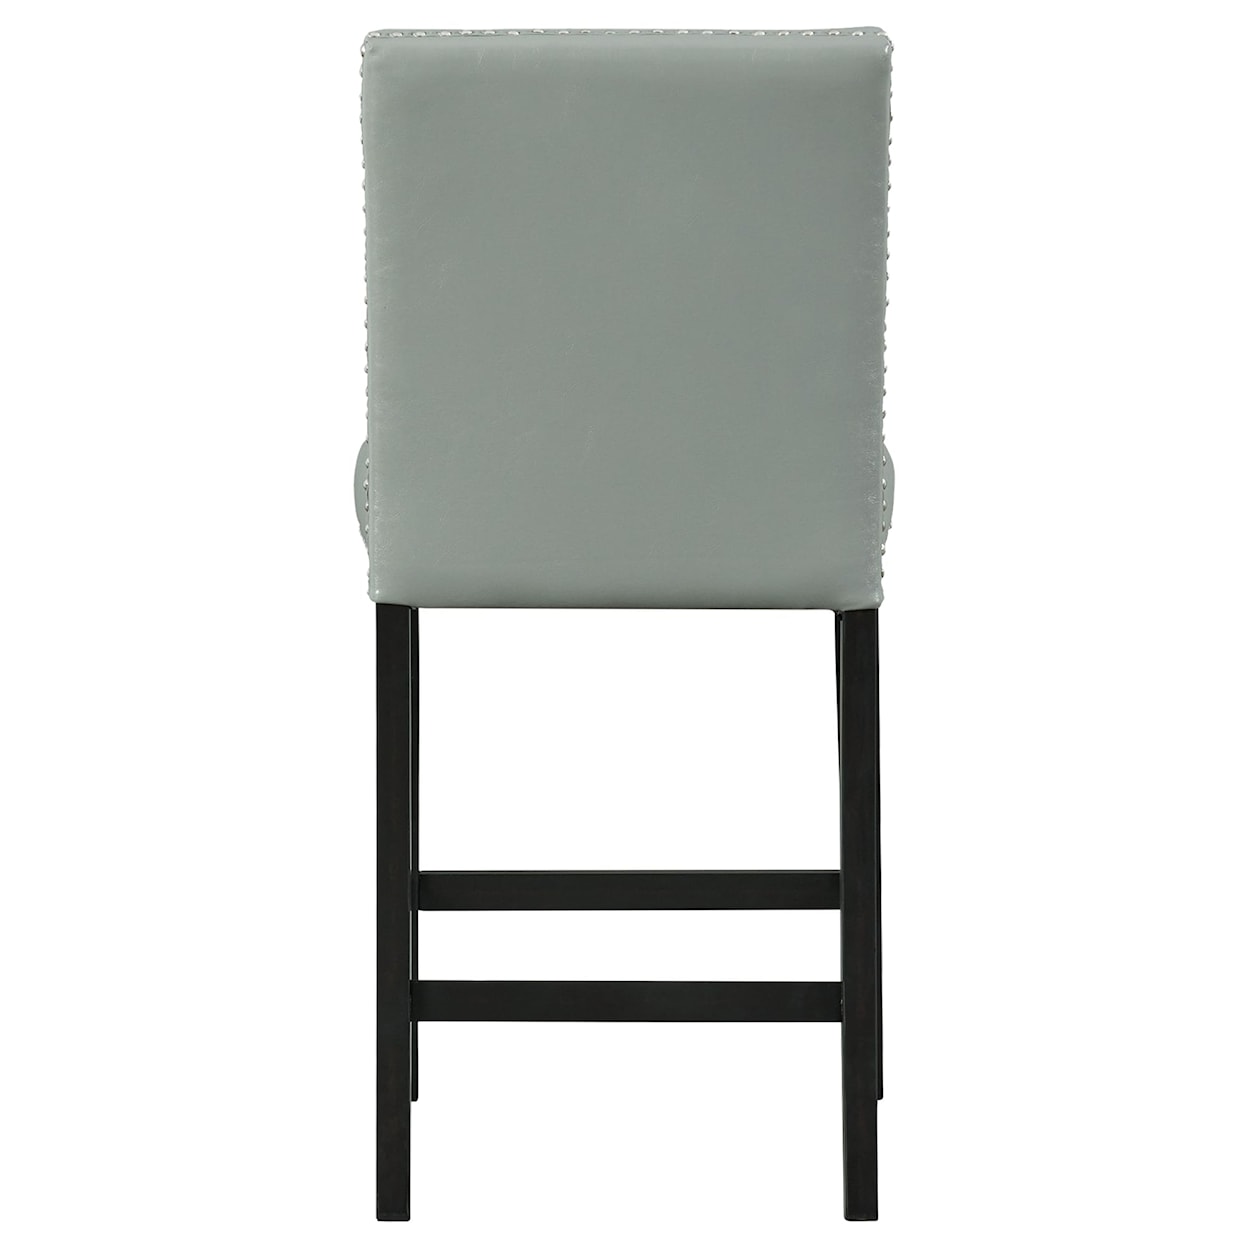 Elements International Meridian Set of 2 Counter Height Side Chairs